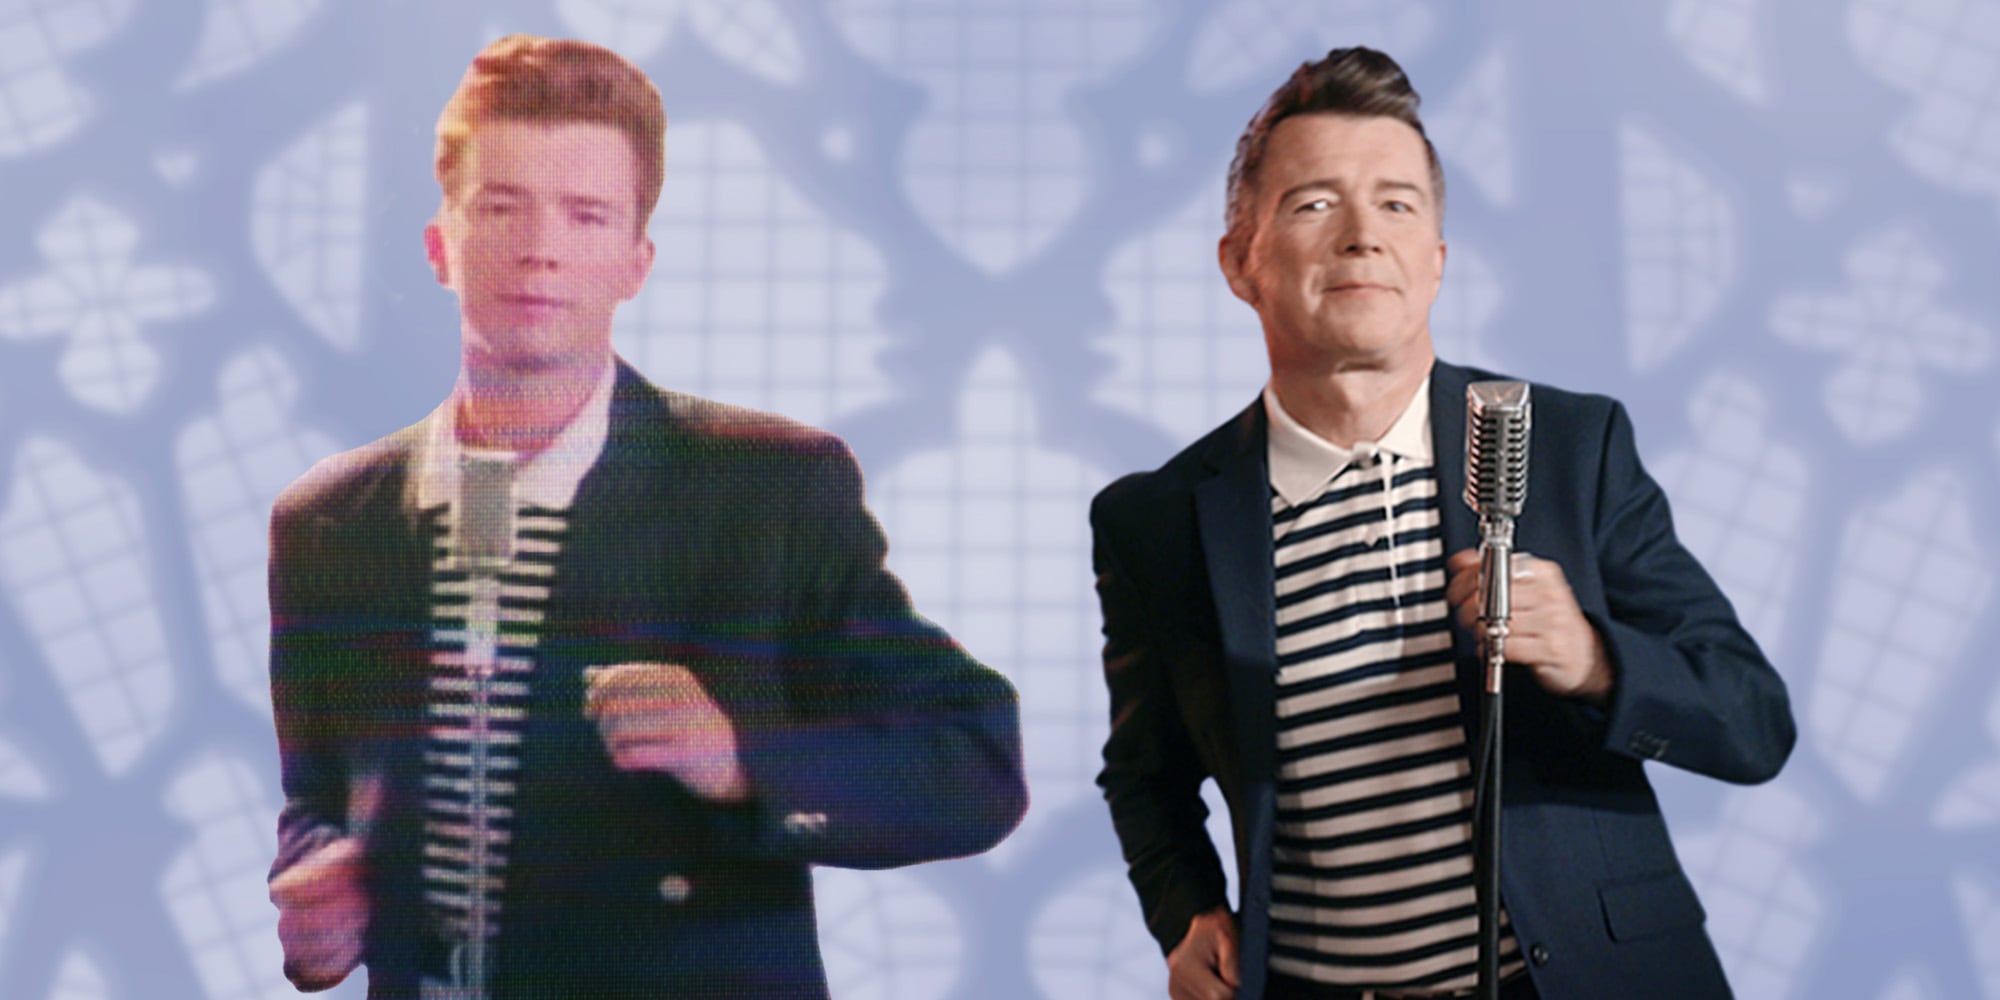 CSAA Insurance and Deloitte Digital Are Going to Rickroll the Super Bowl